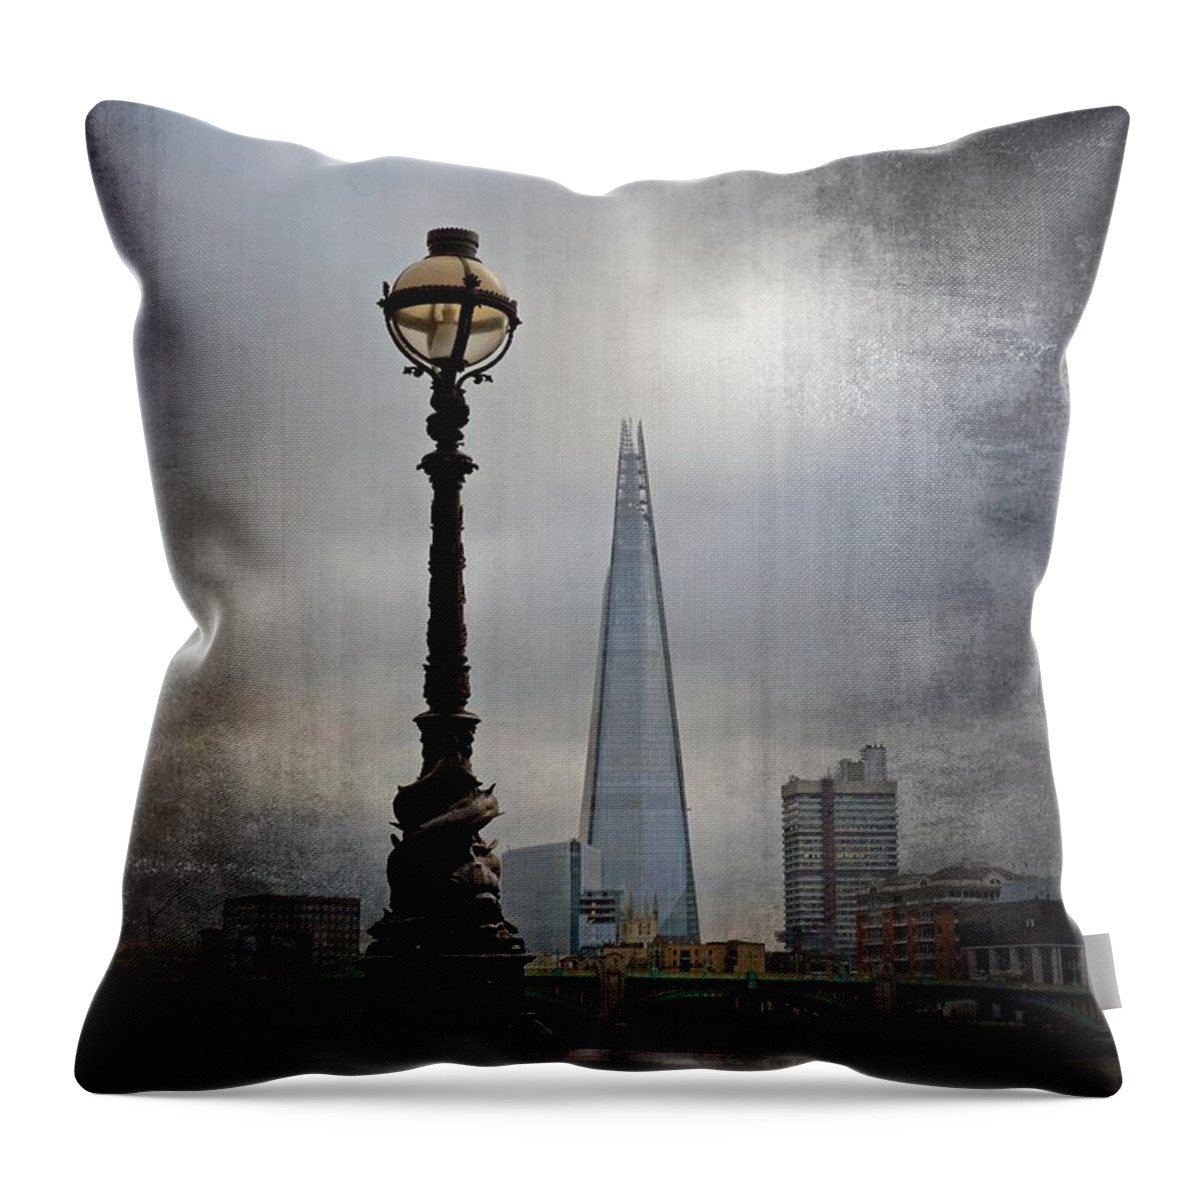 Dolphin Lamps Throw Pillow featuring the photograph Dolphin Lamp Posts London by Lynn Bolt